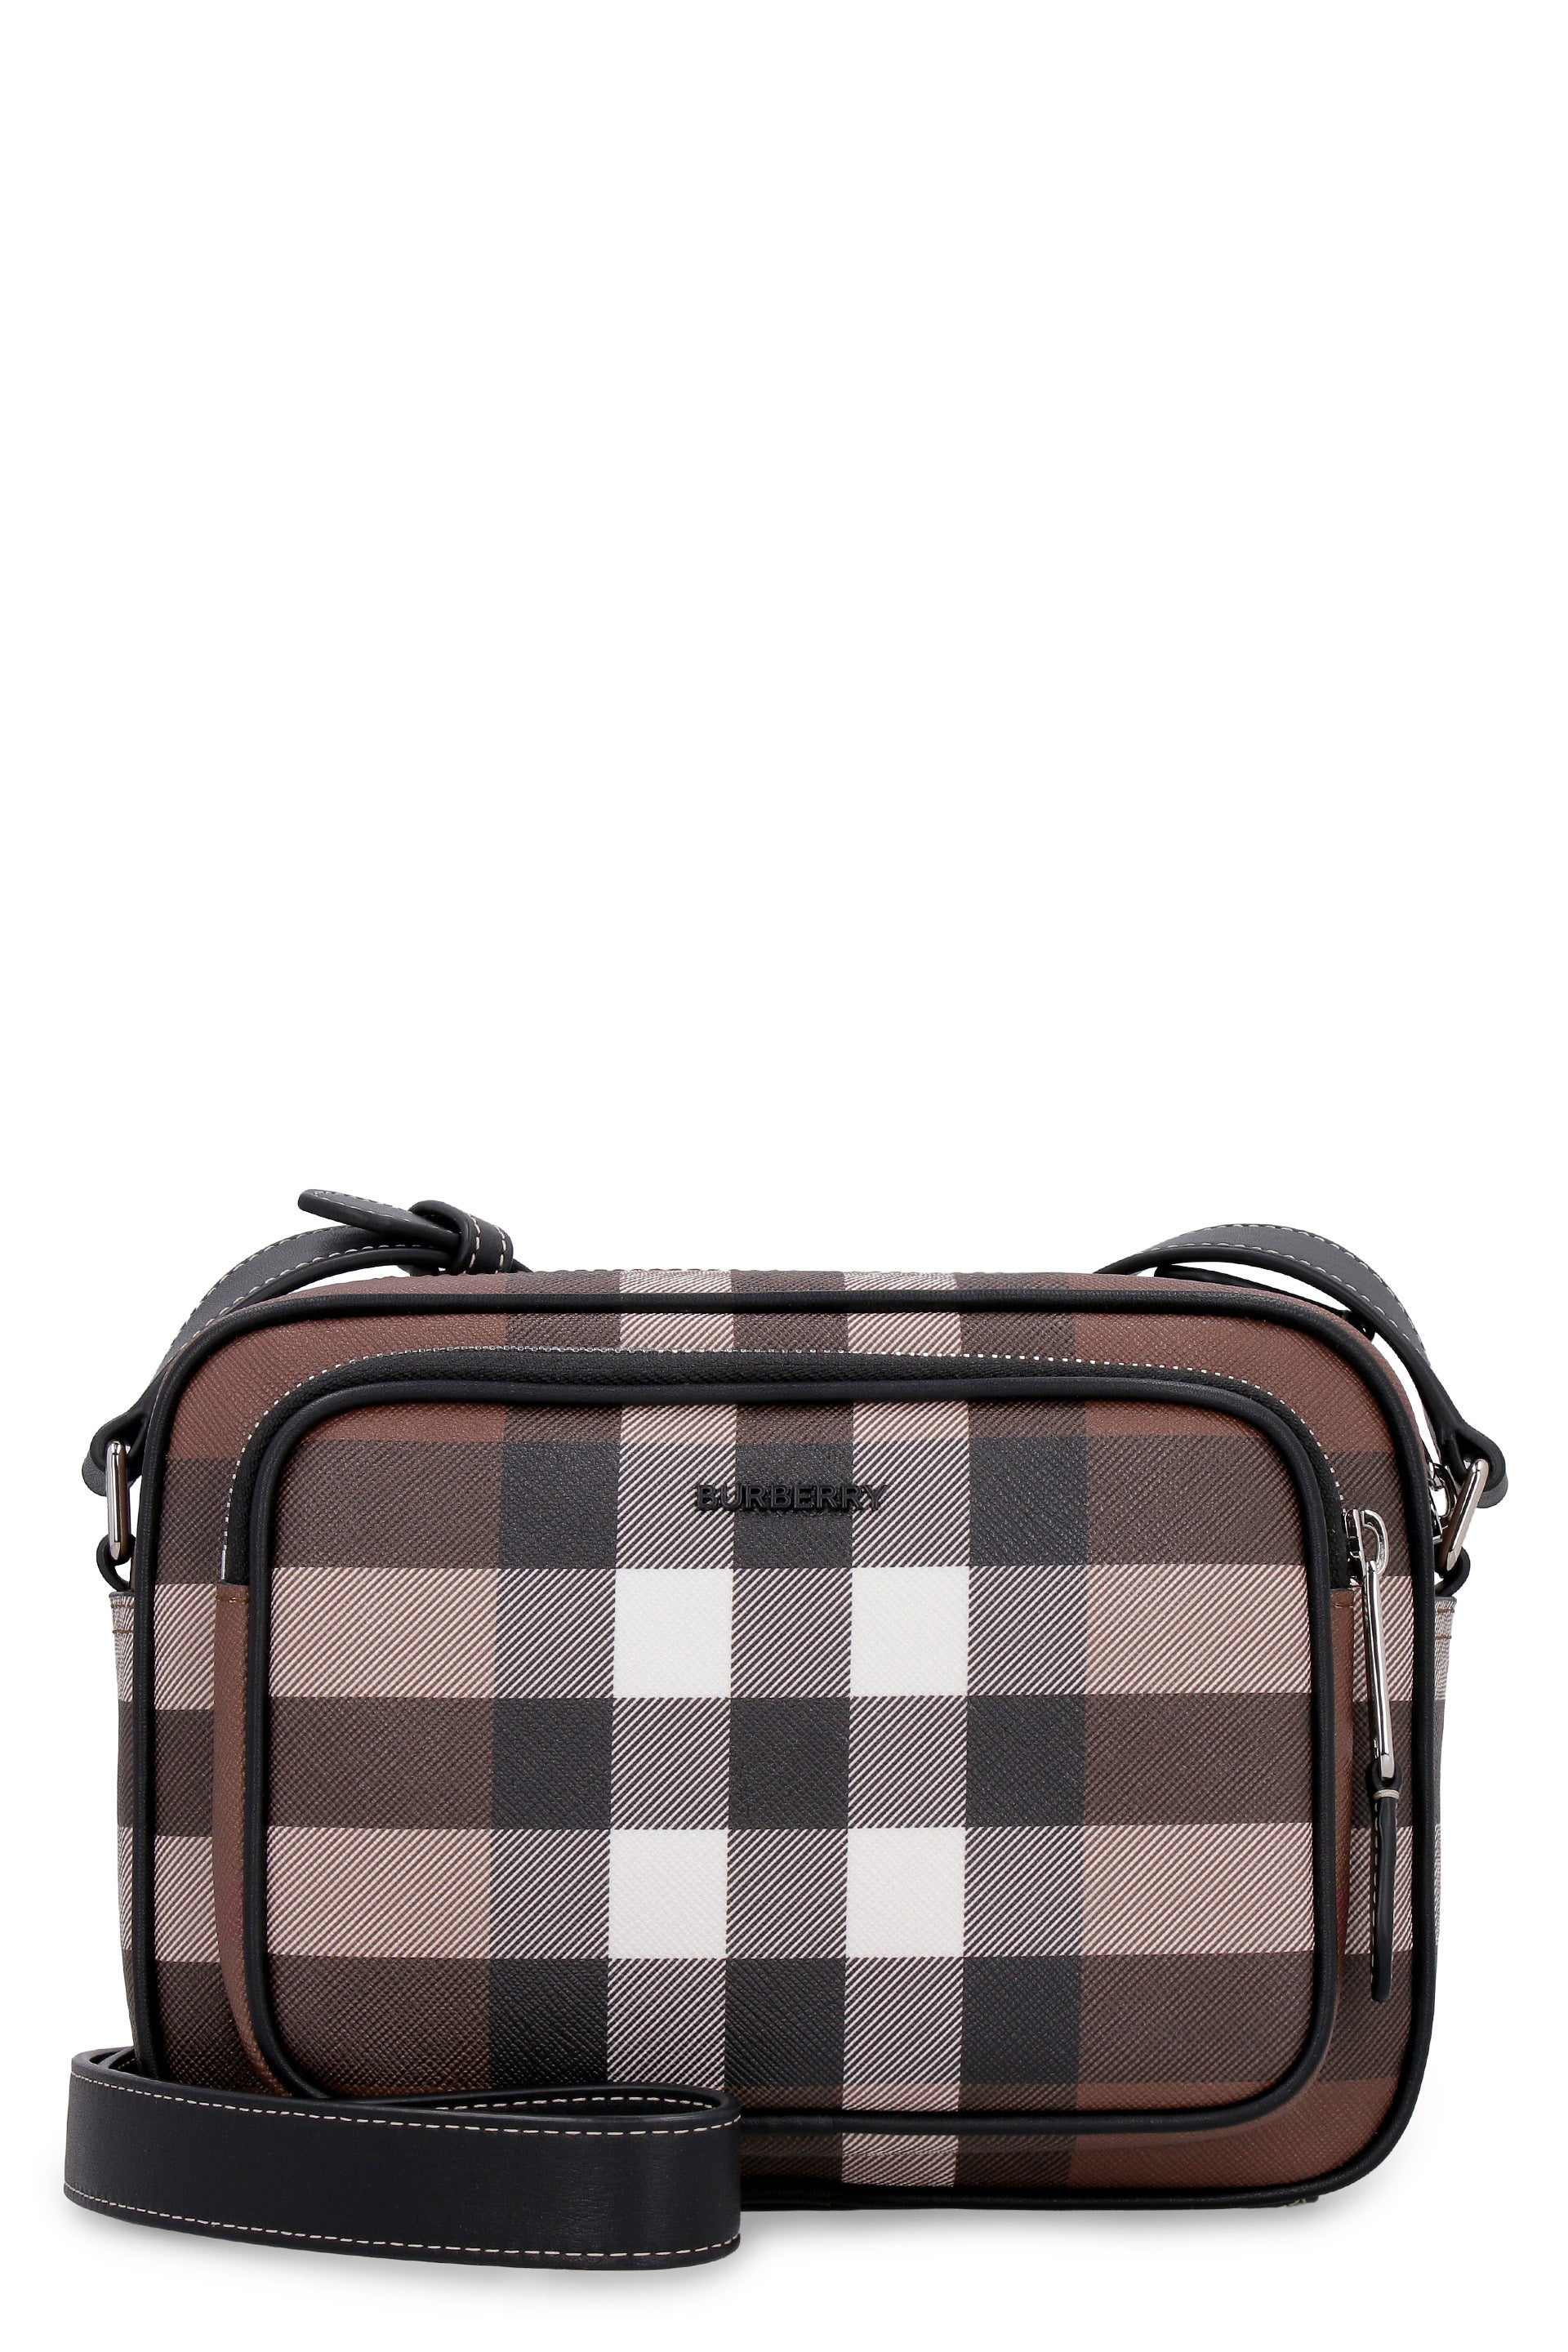 Shop Burberry Classic Brown Messenger Bag For Men With Check Motif And Leather Details